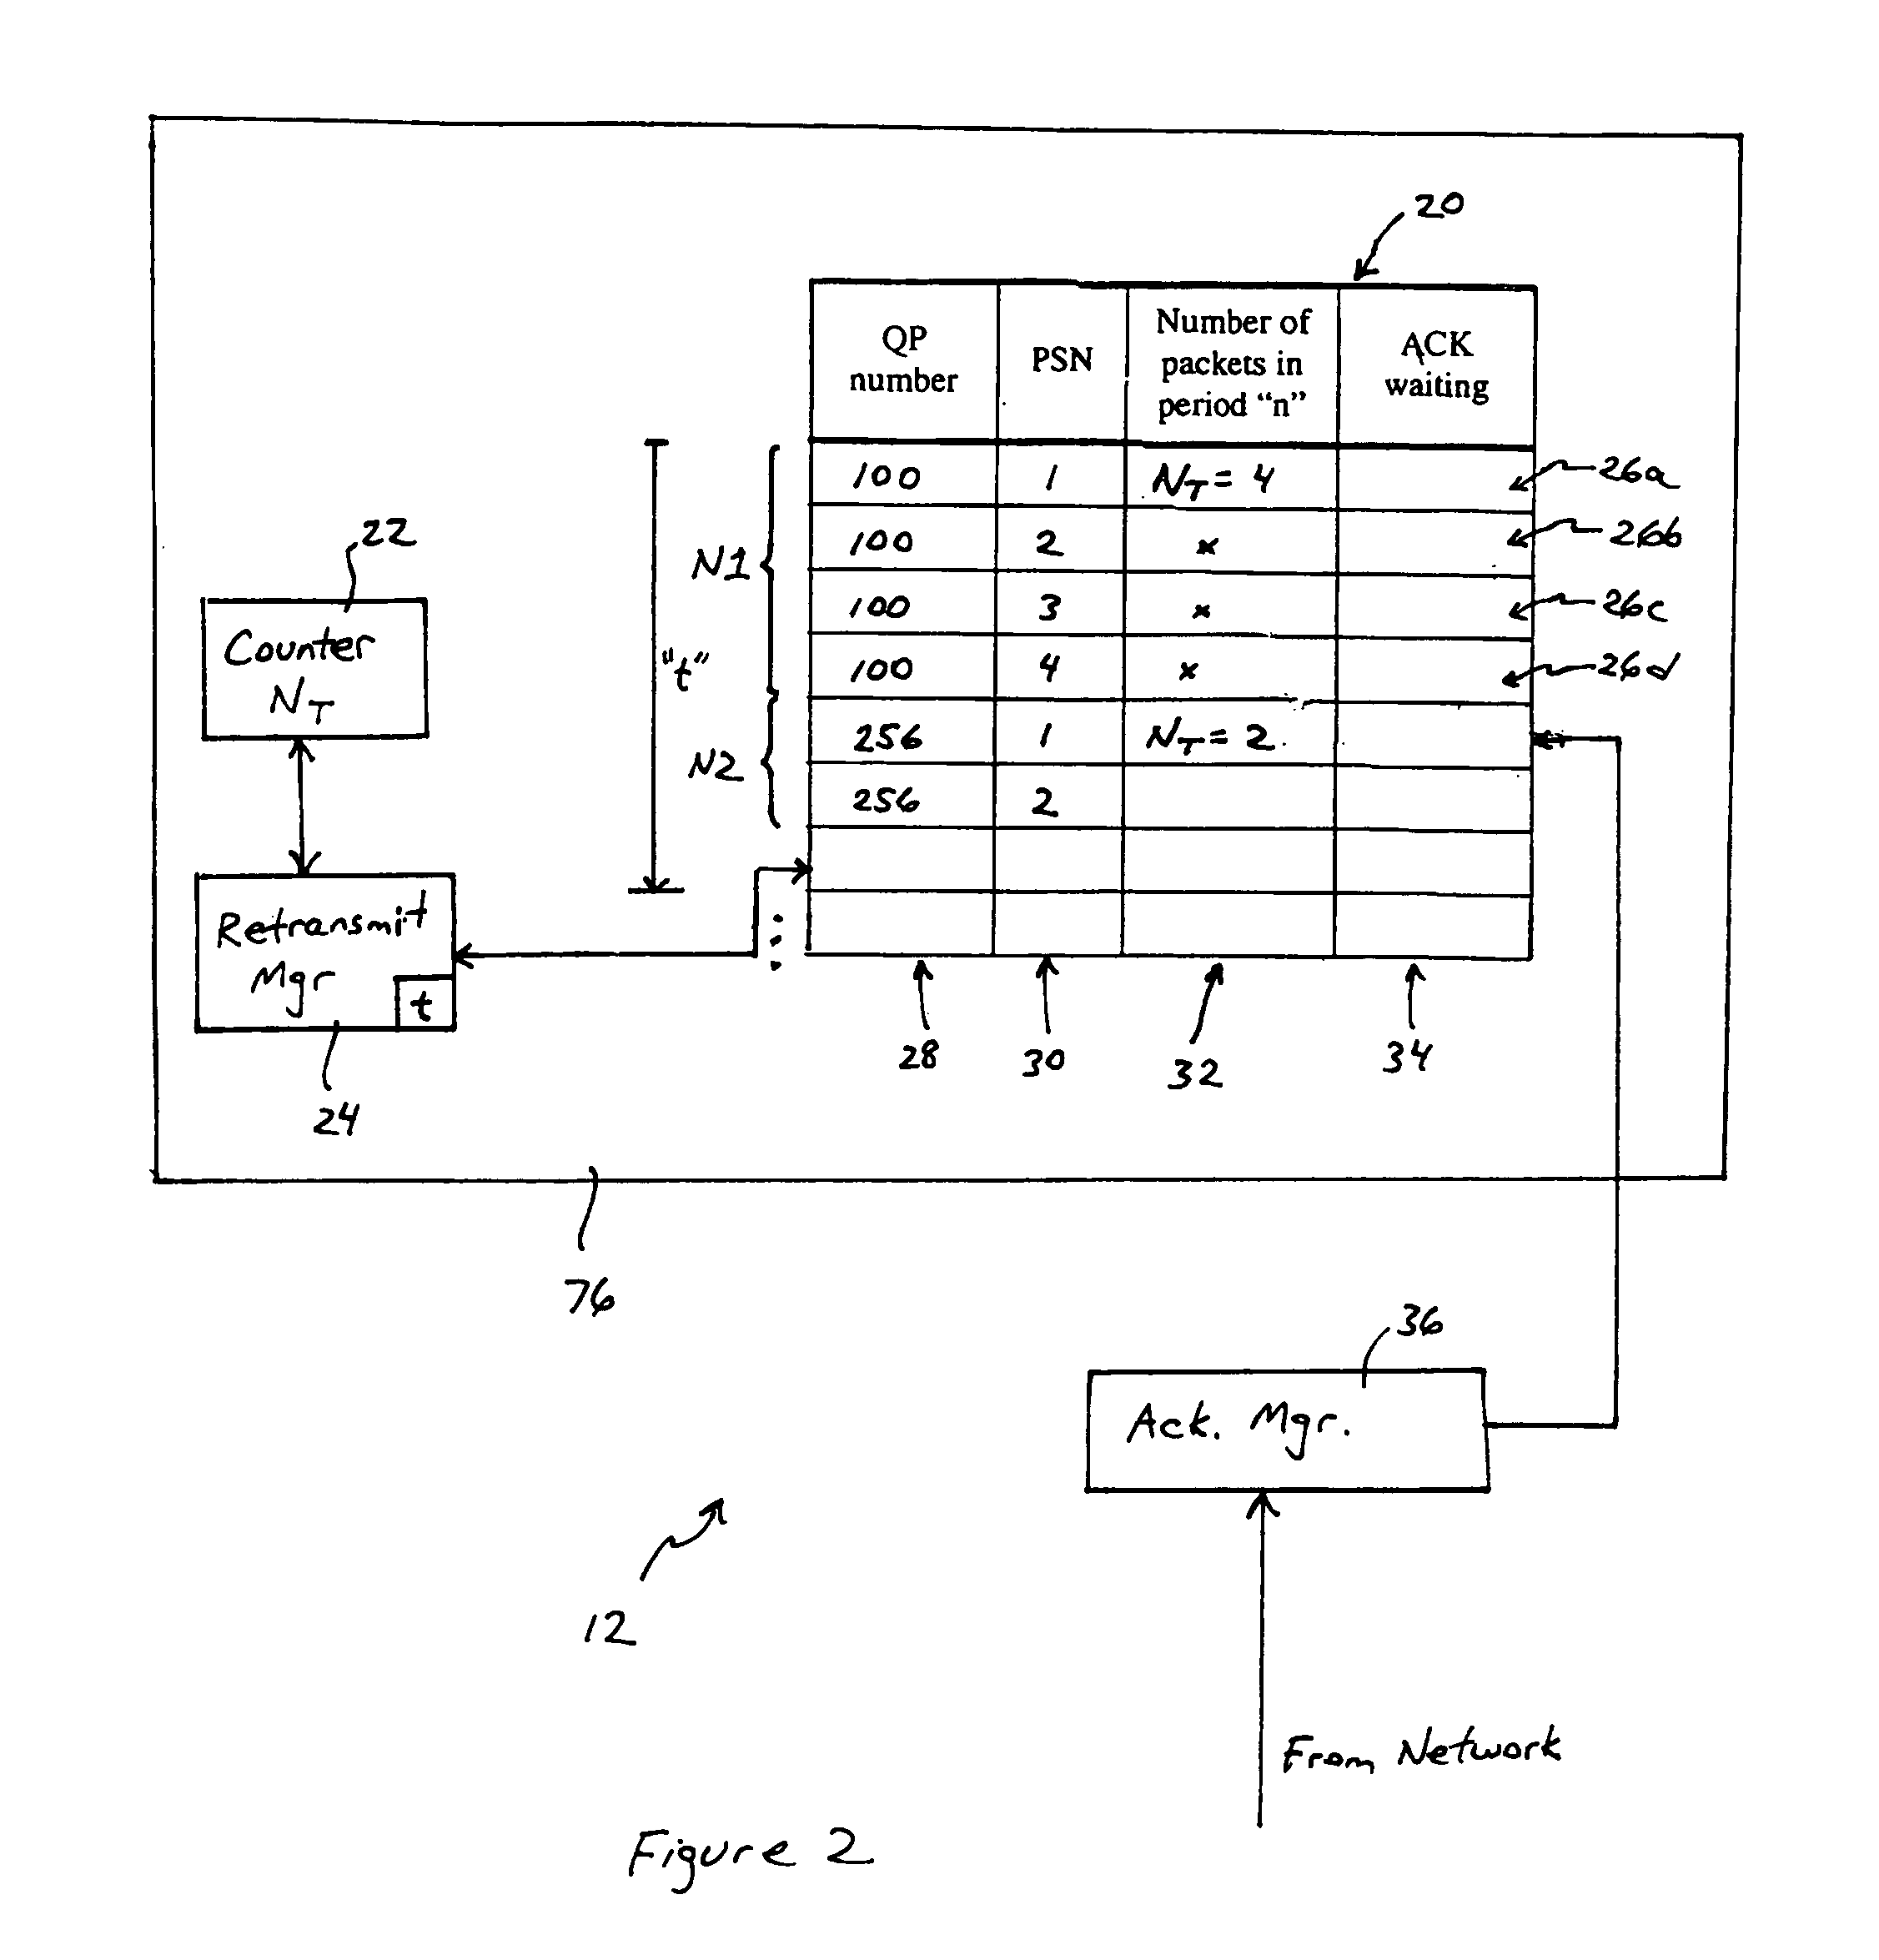 Arrangement for managing transmitted packets requiring acknowledgement in a host channel adapter